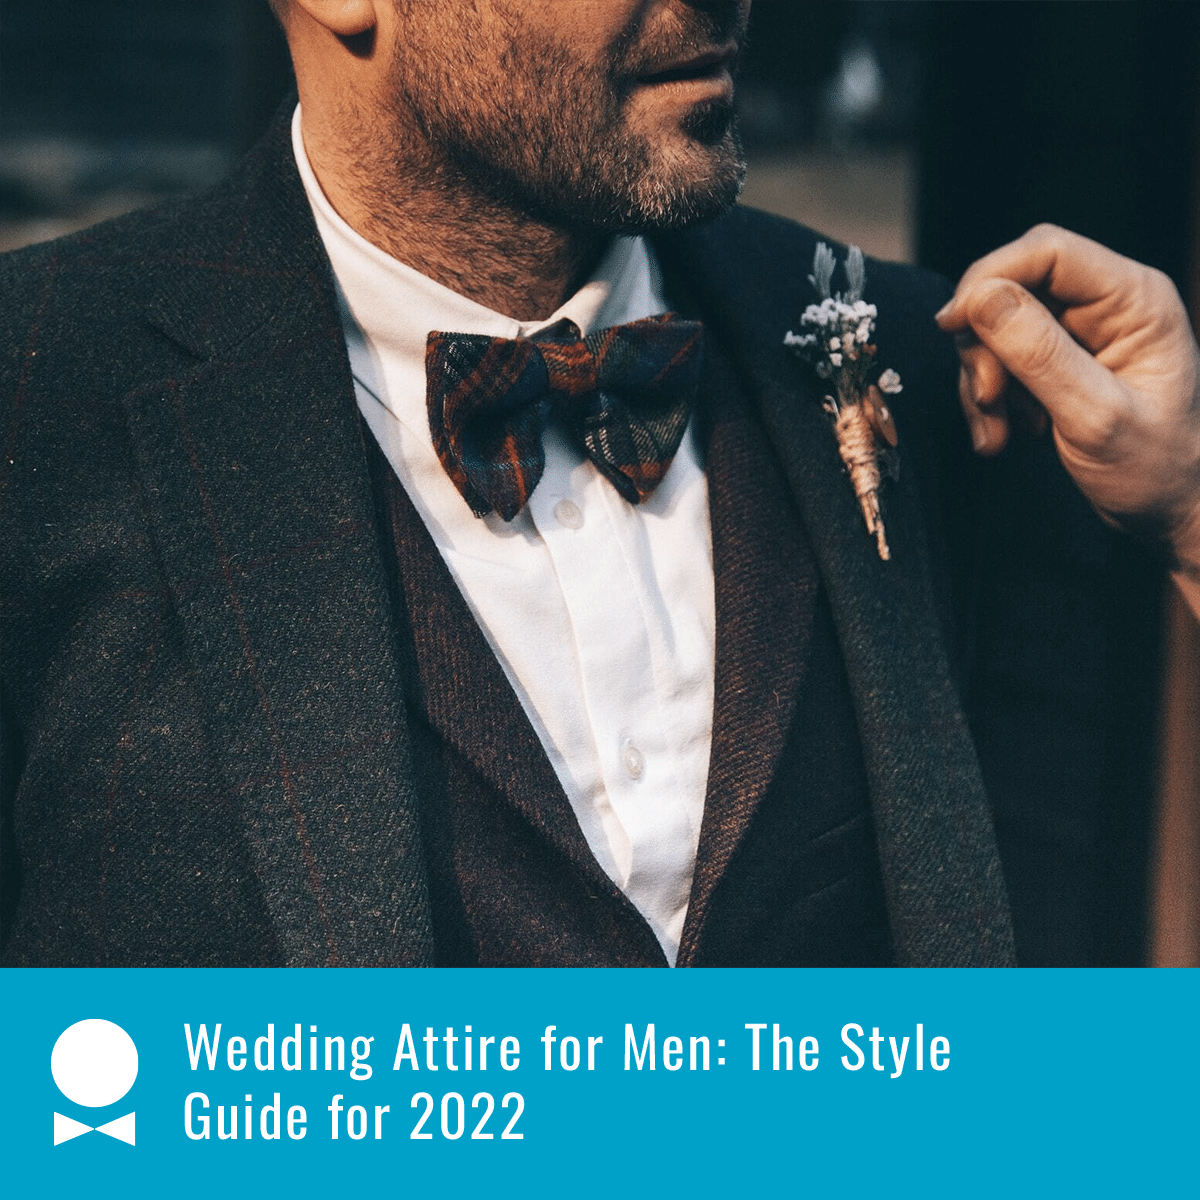 Wedding Attire for Men: The Style Guide for 2022